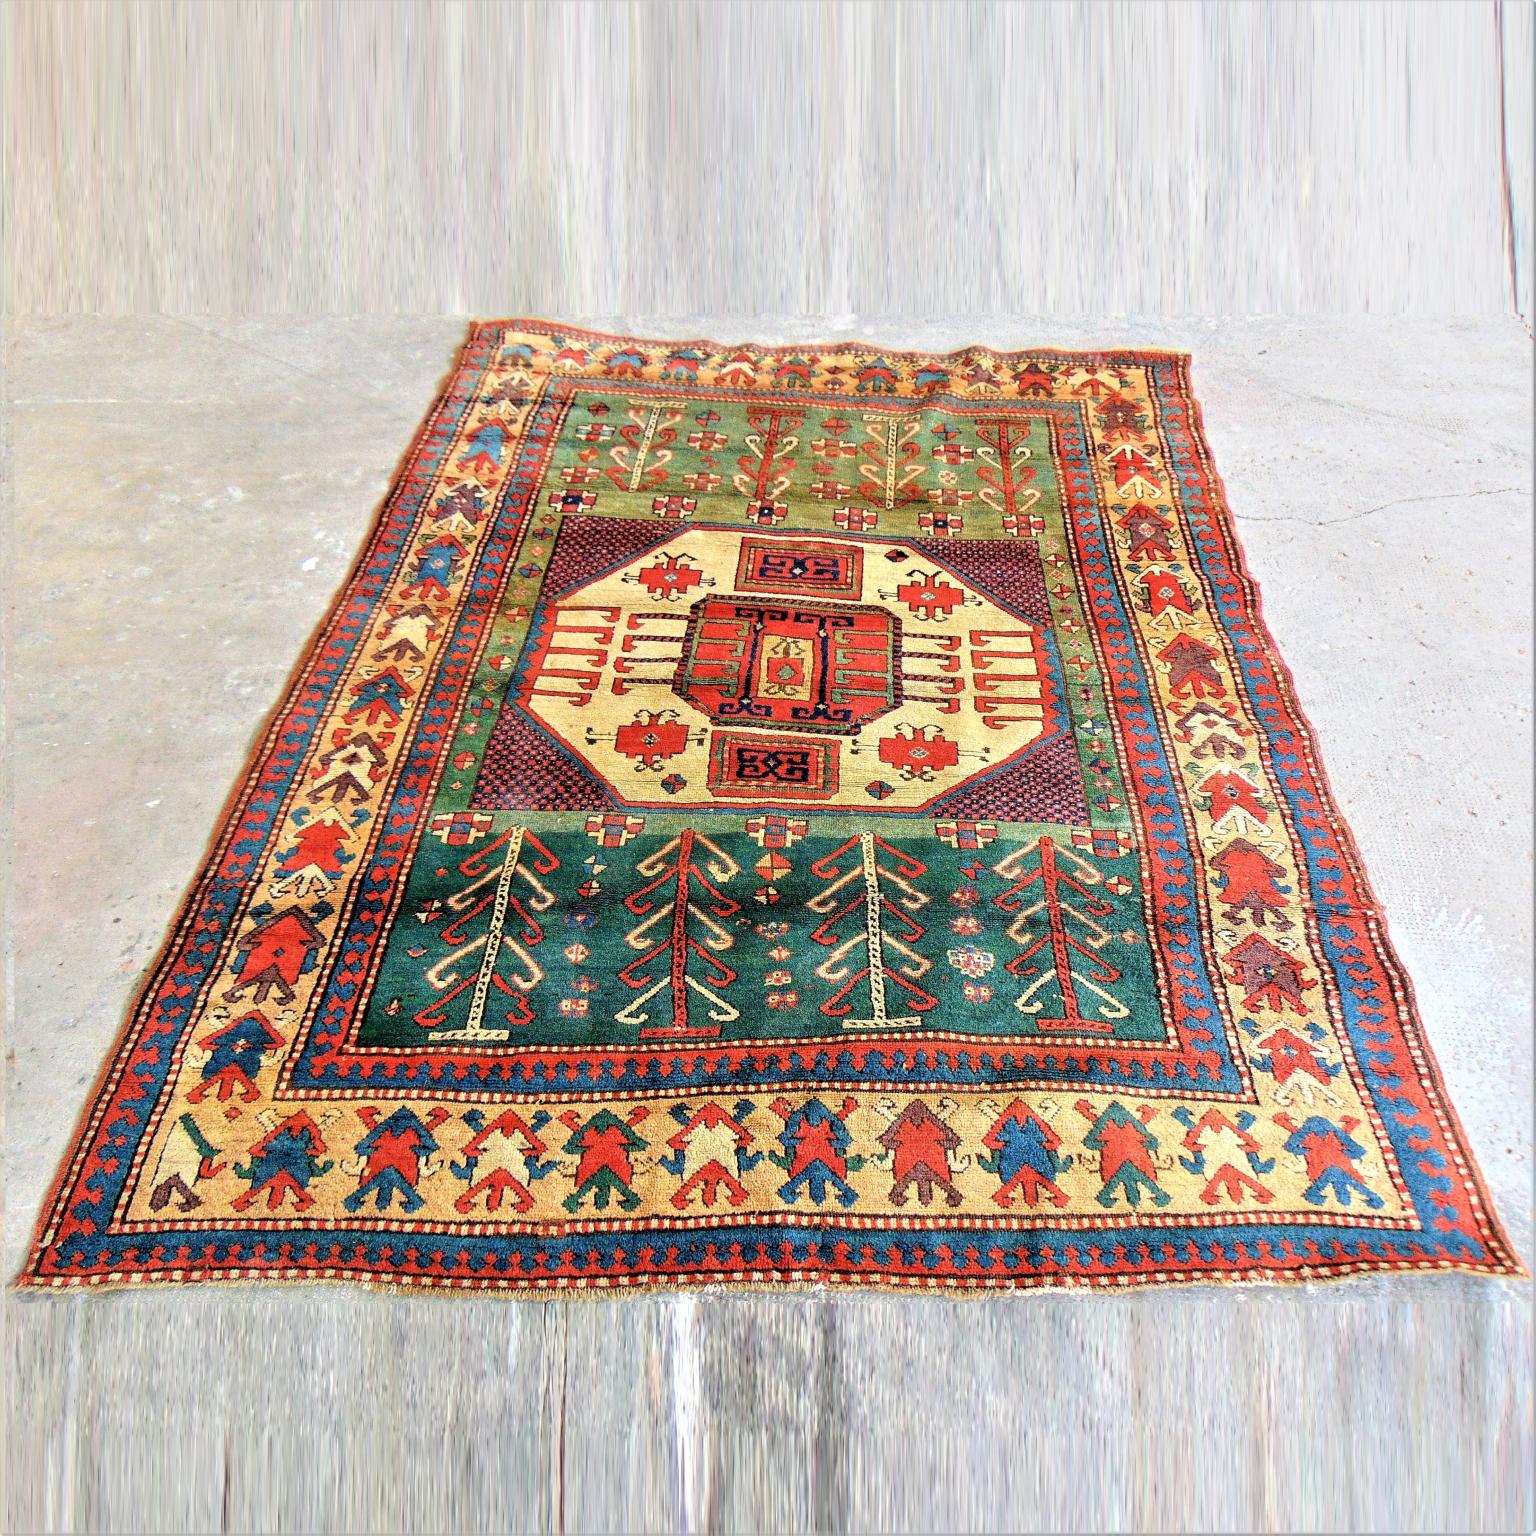 We find in this carpet all the features of the best known of Karaciof rugs, with the typical beige octagonal central medallion. As usual the mighty octagon stands out on the classical red and blue square checkerboard. Four red and blue hooks,